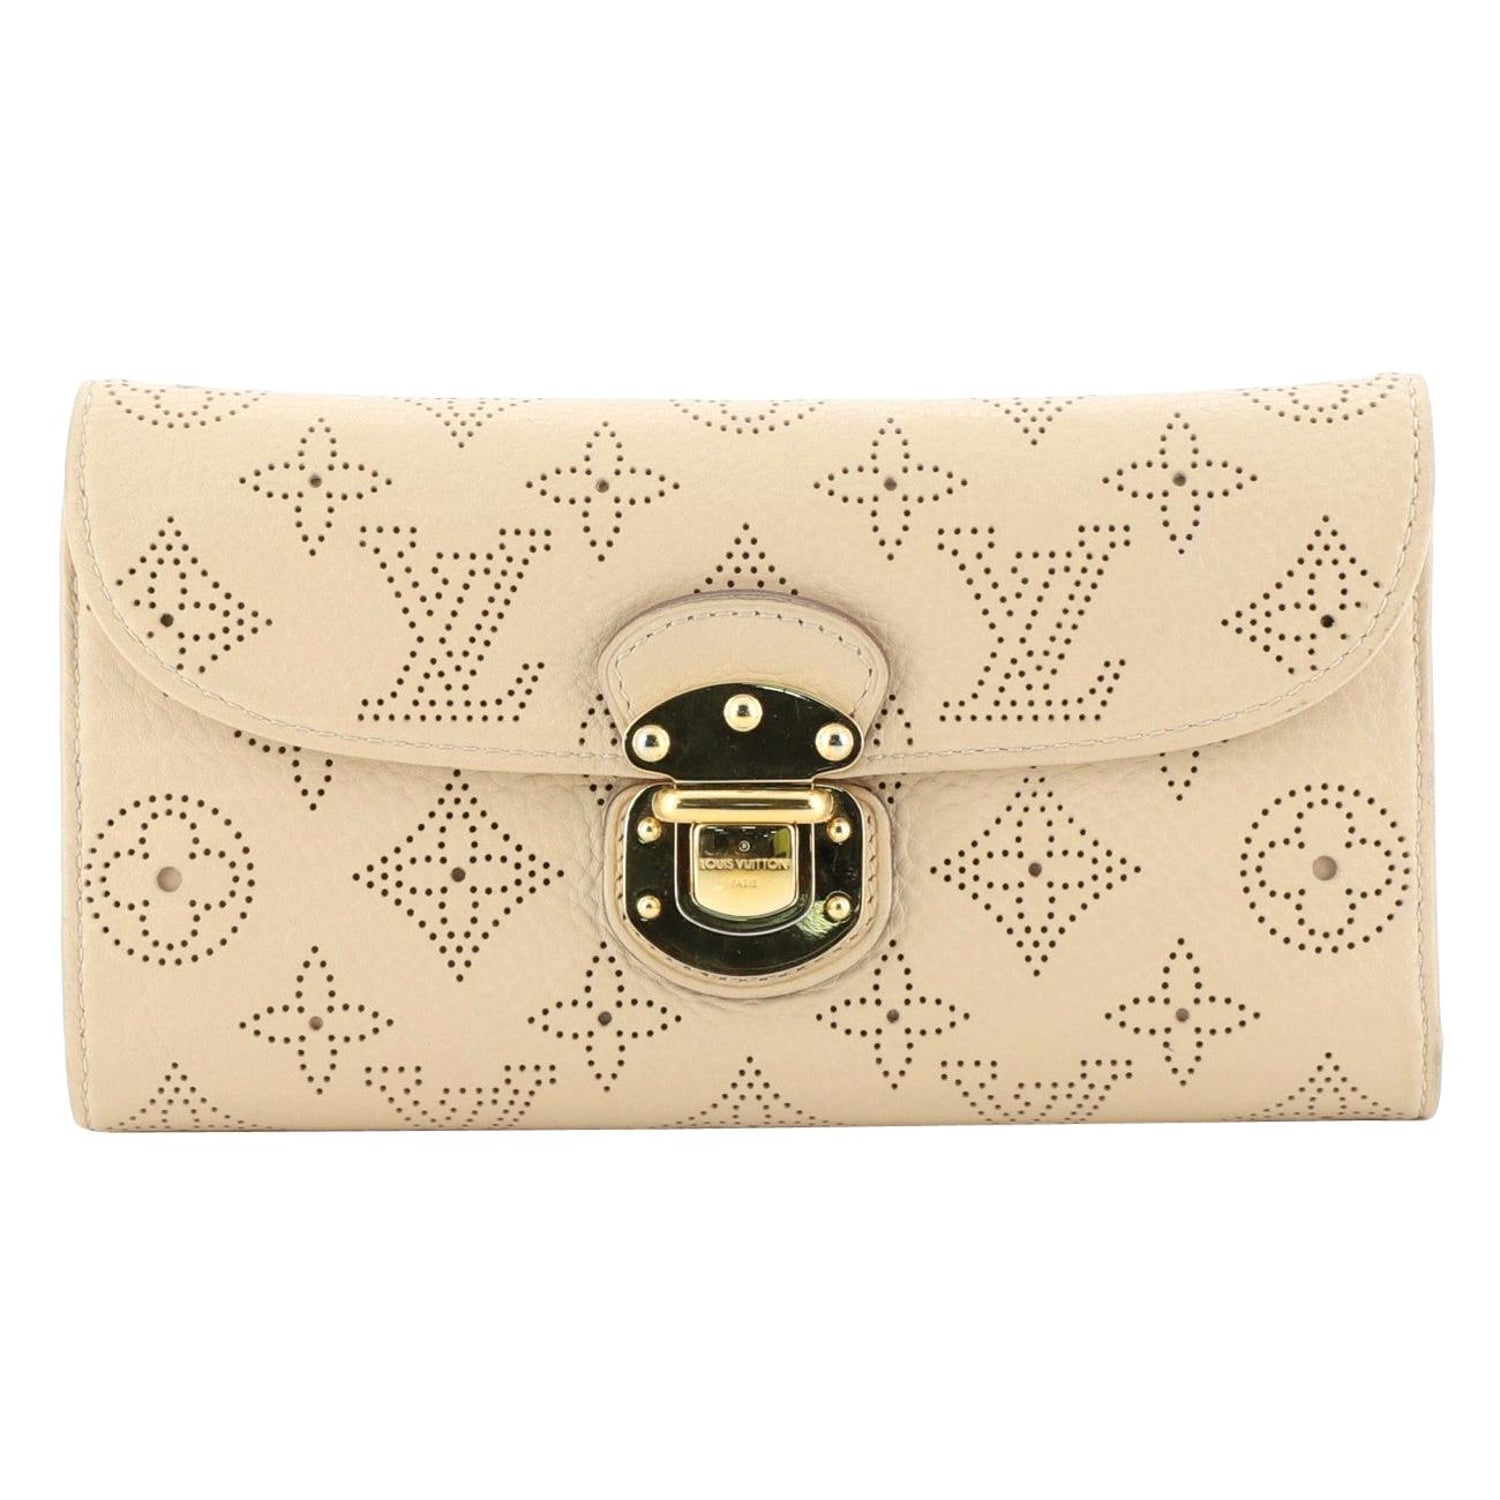 LOUIS VUITTON AMELIA WALLET IN MAHINA MONOGRAM LEATHER PERFORATED